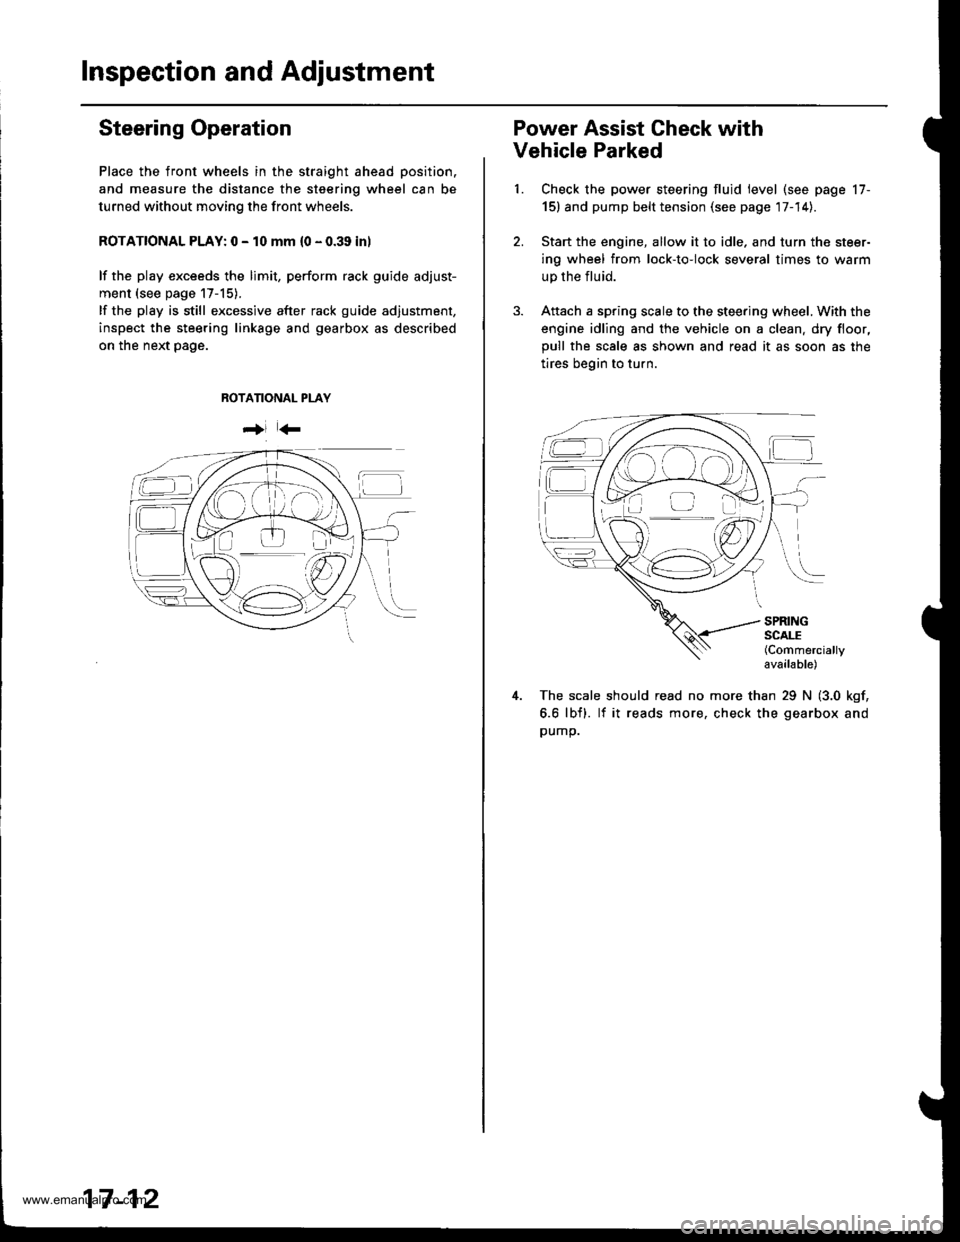 HONDA CR-V 1999 RD1-RD3 / 1.G Workshop Manual 
Inspection and Adjustment
Steering Operation
Place the front wheels in the straight ahead position.
and measure the distance the steering wheel can be
turned without moving the front wheels.
ROTATION